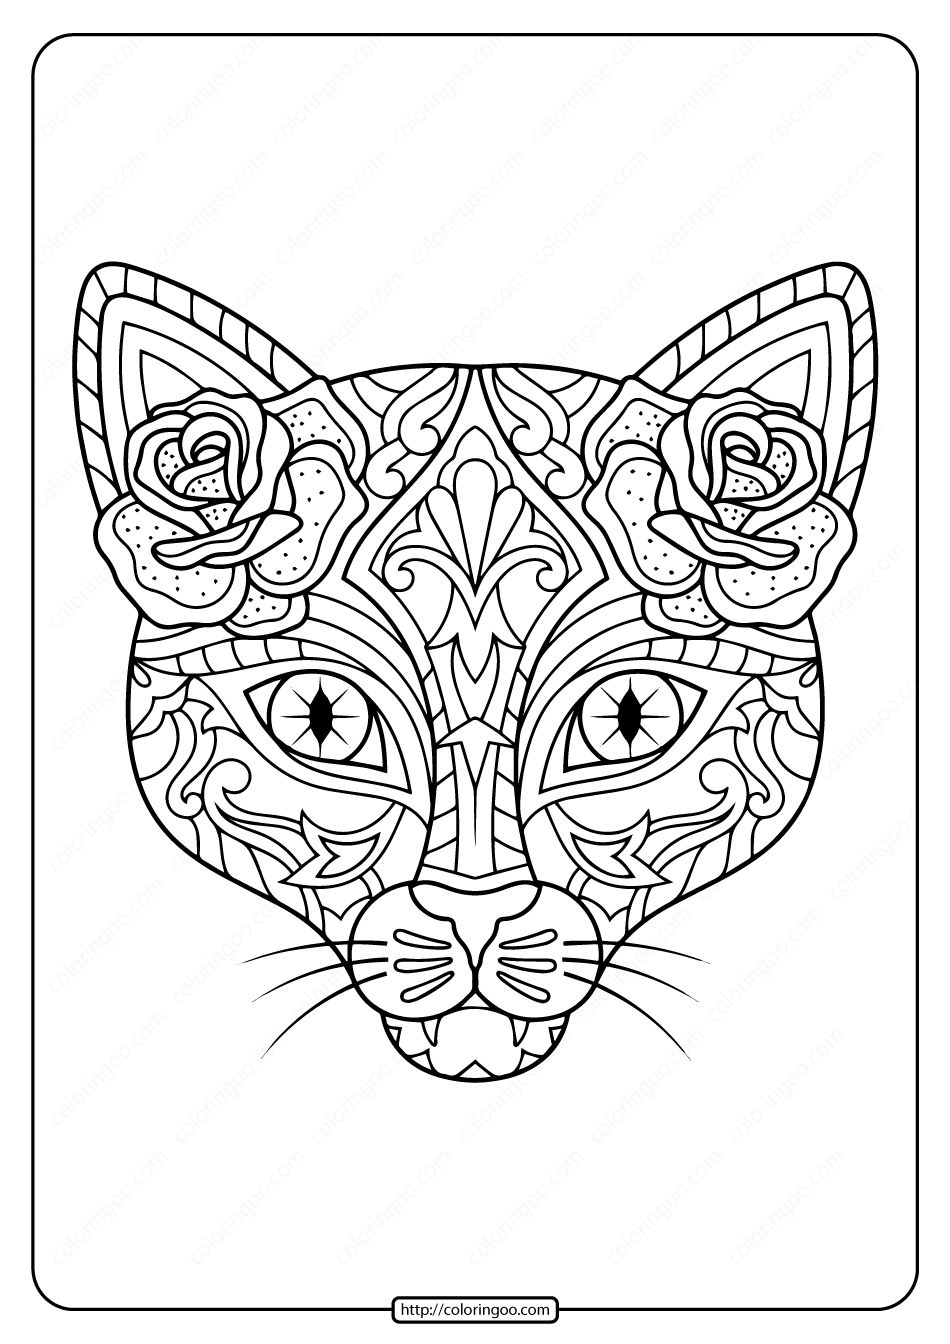 printable day of the dead cat coloring page